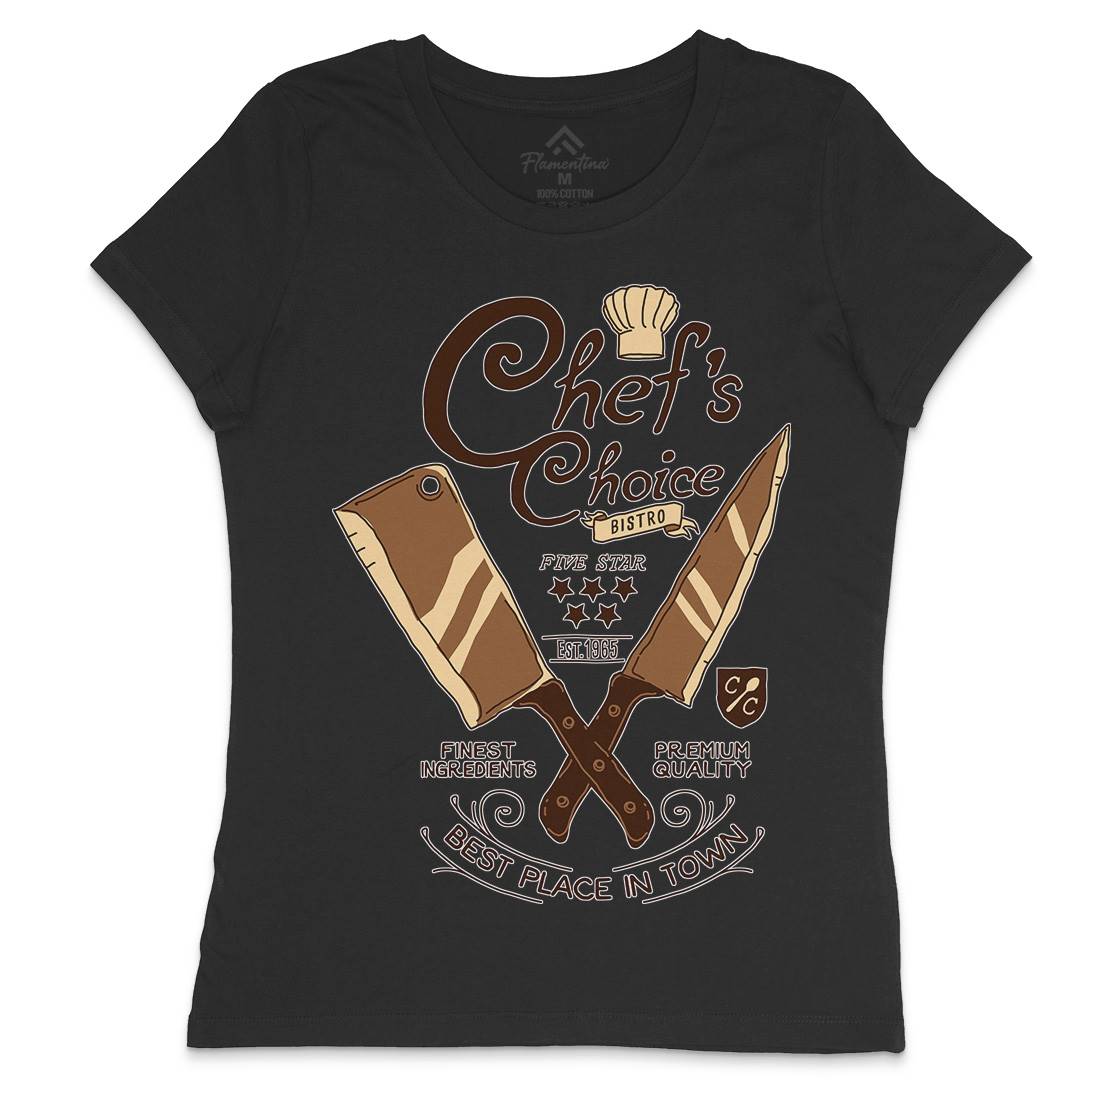 Chef&#39;s Choice Womens Crew Neck T-Shirt Food A980